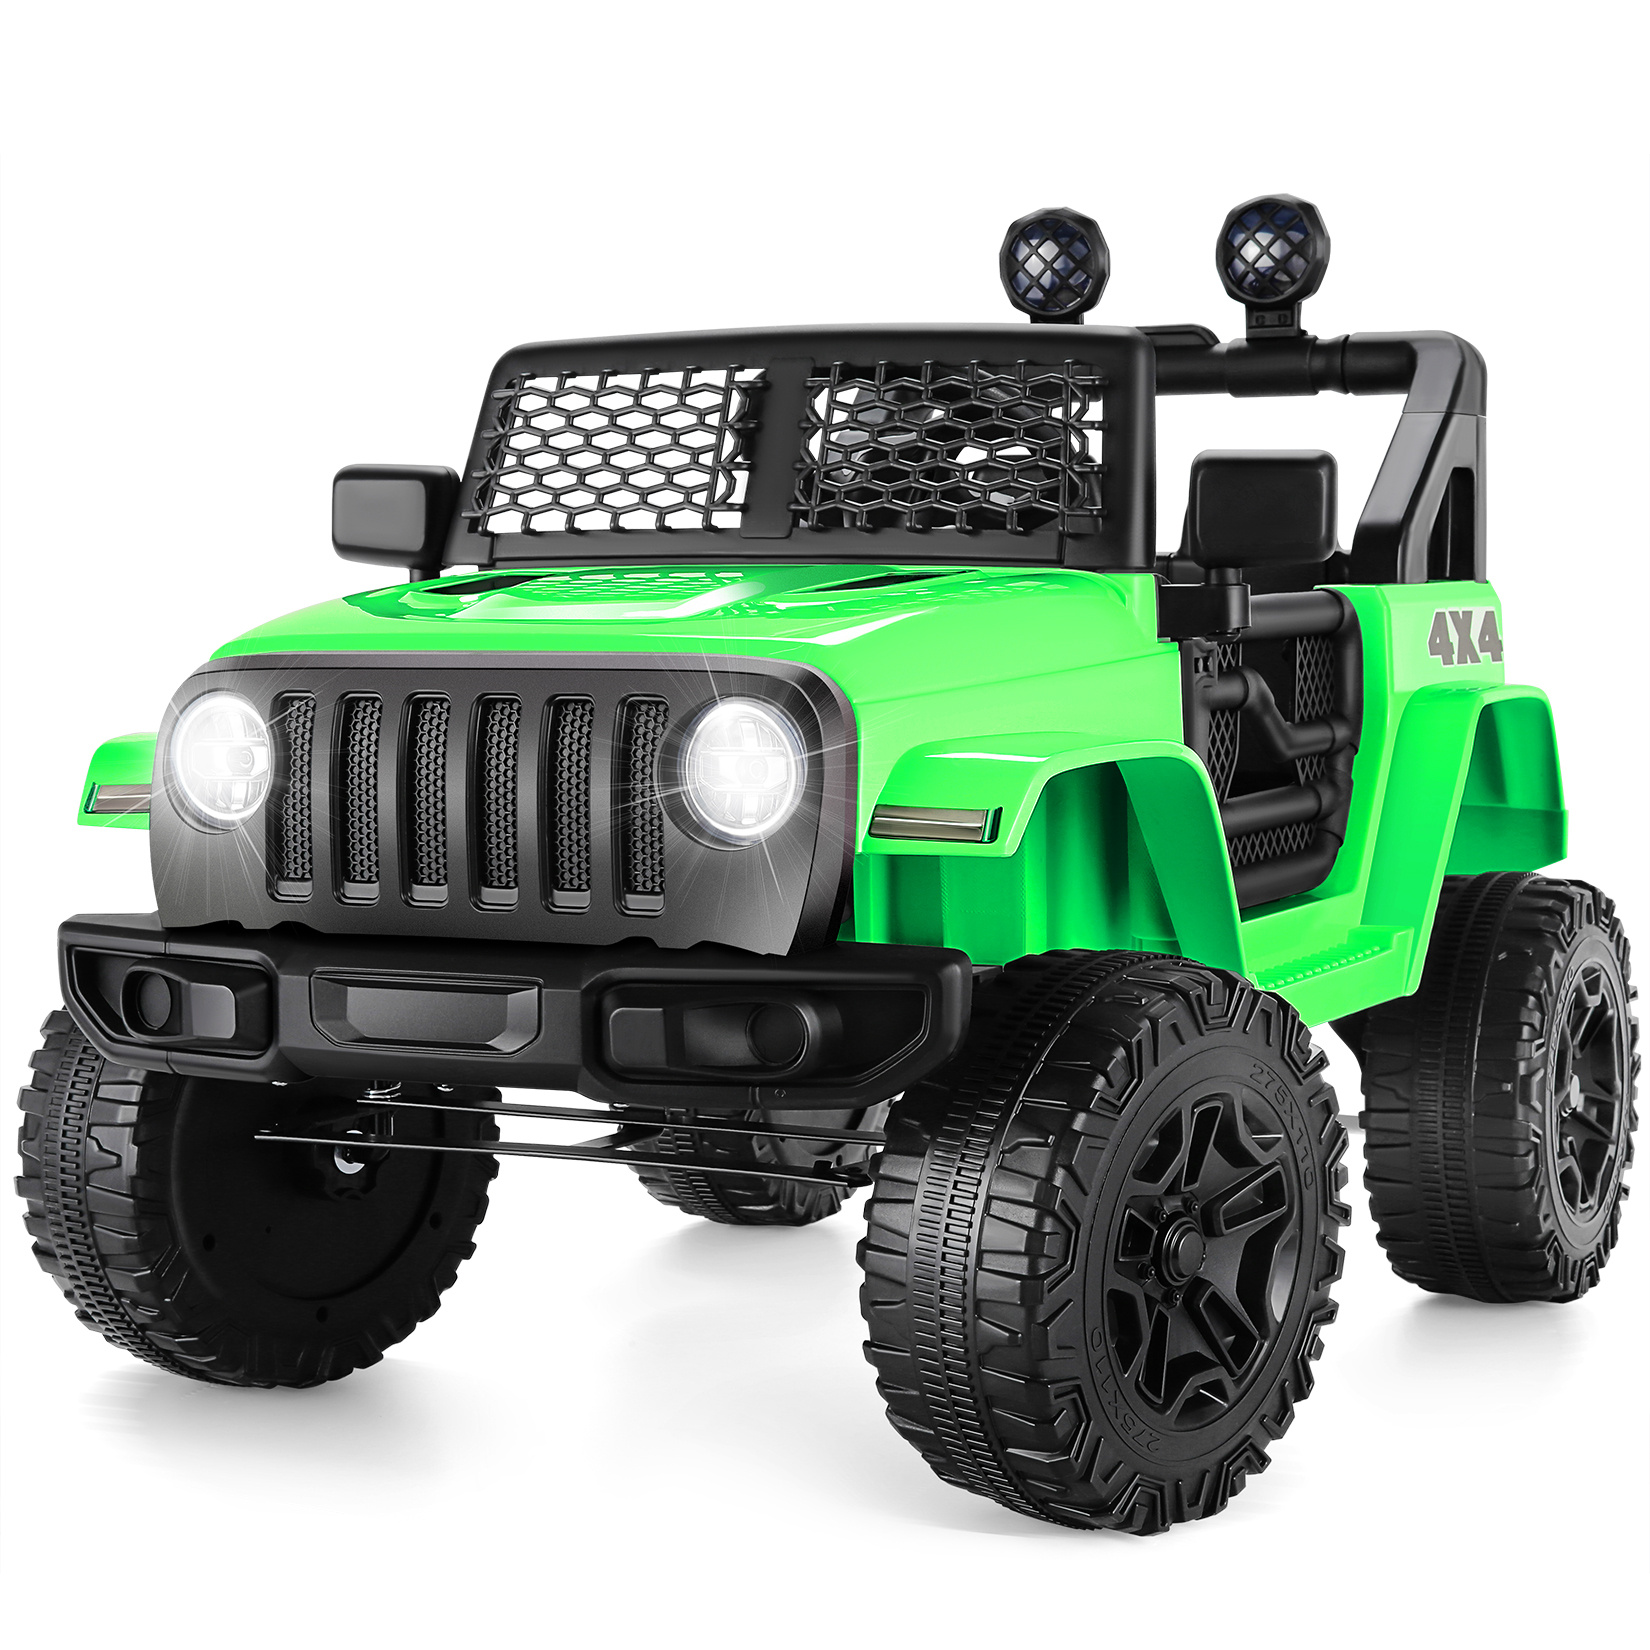 

Kids 12v Electric Car Truck, 700mah Outdoors For Kids, Playground Kids Car Toys W/led Lights, Music, 3 Speeds, Spring Suspension, Jeeps Car For Indoor Outdoor, Yard, Playground, Party Games